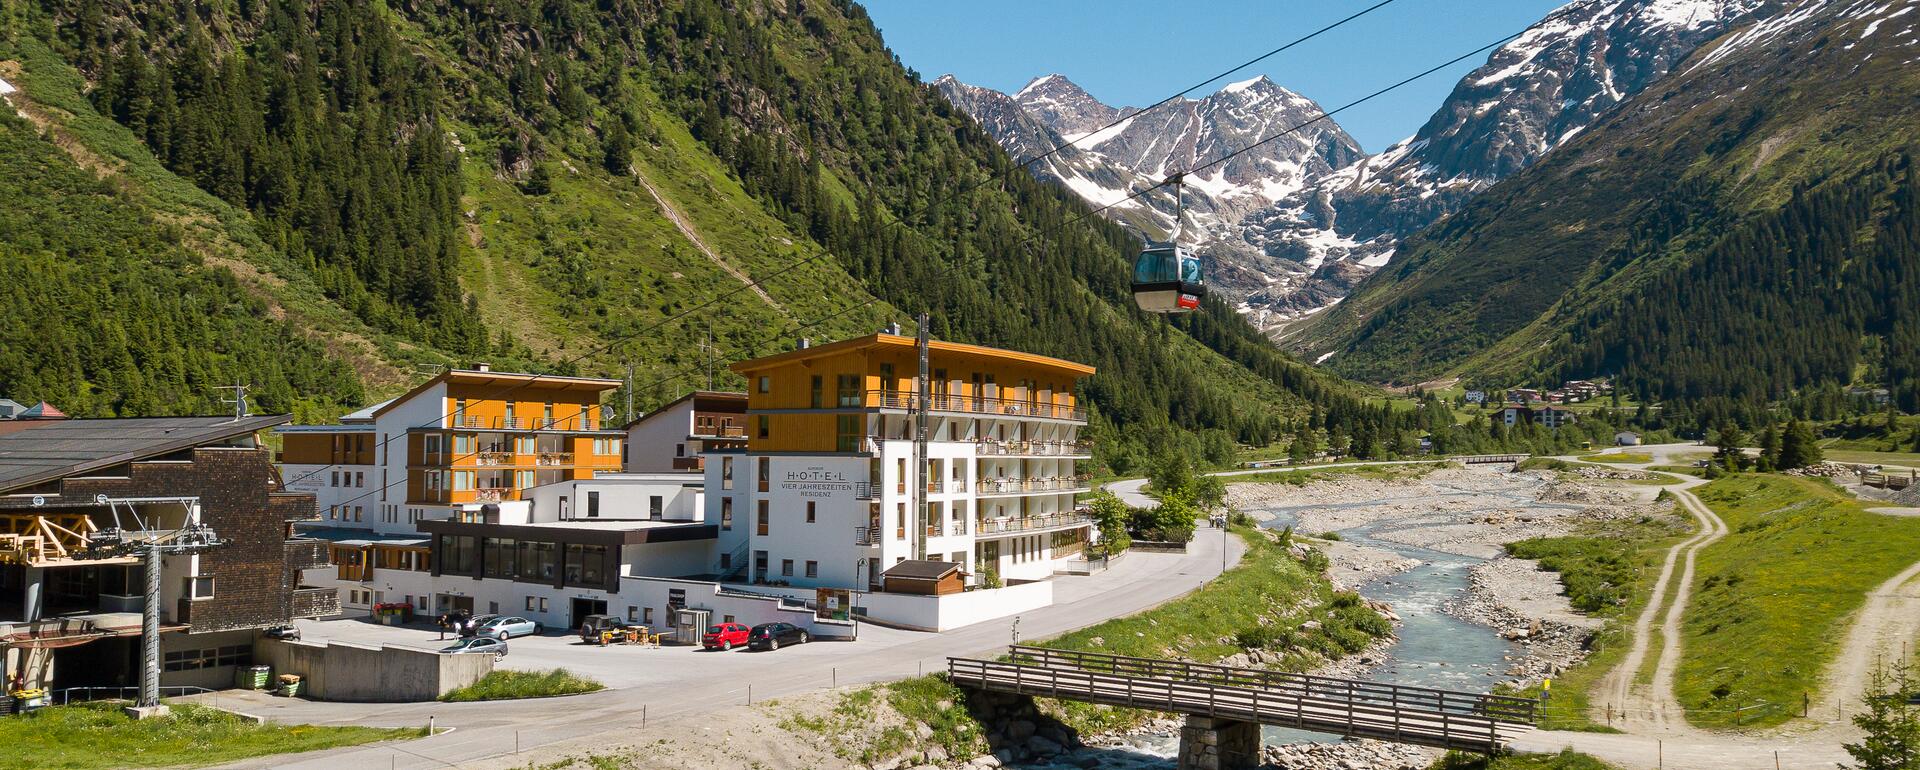 hotel directly at the mountain railroad Tyrol